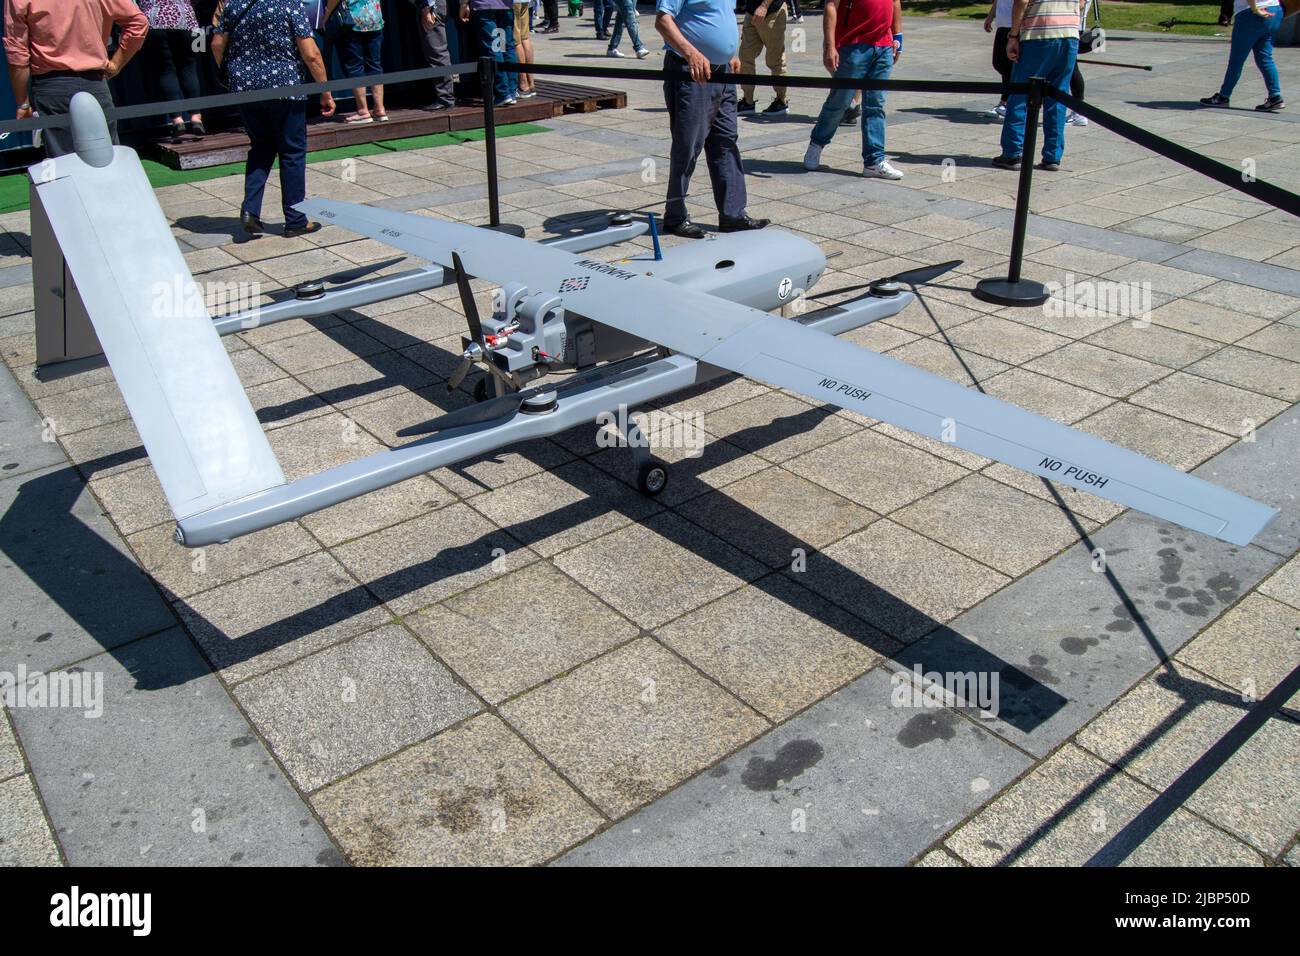 Military drones used for terrain recognition and tactical offensive attacks. War and technology. Remote offensive, remote military drone intelligence. Stock Photo